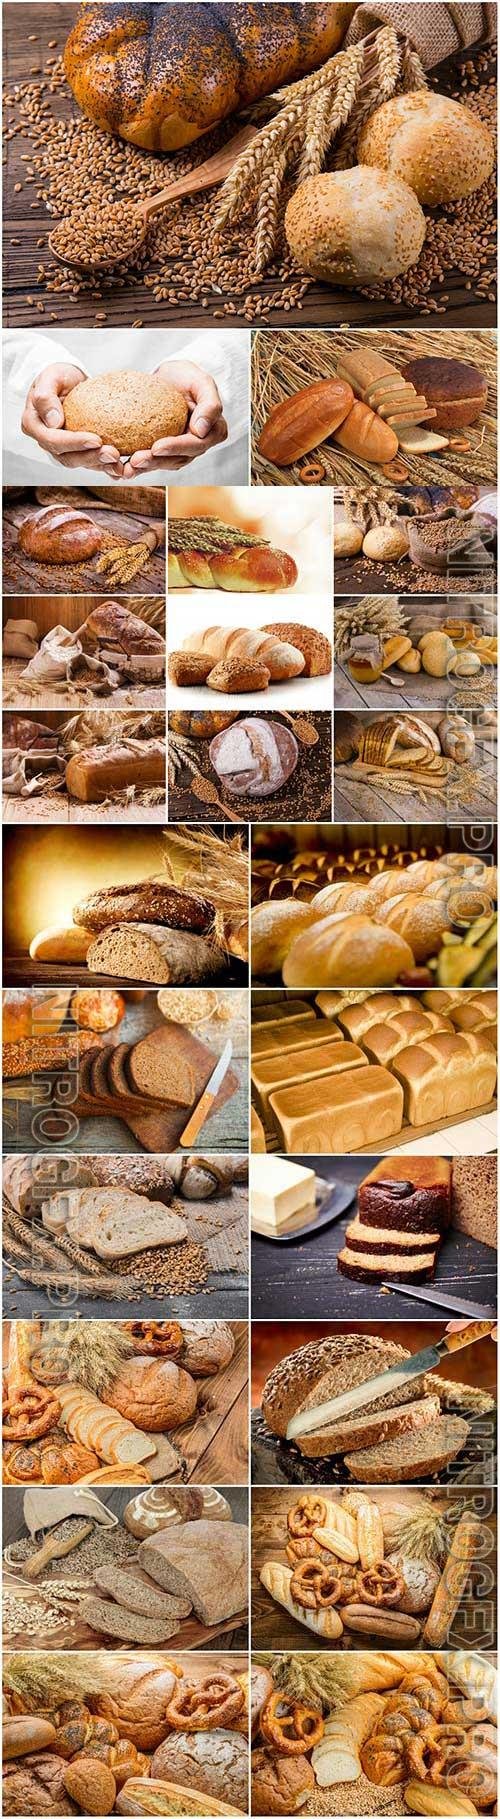 Bread and buns stock photo